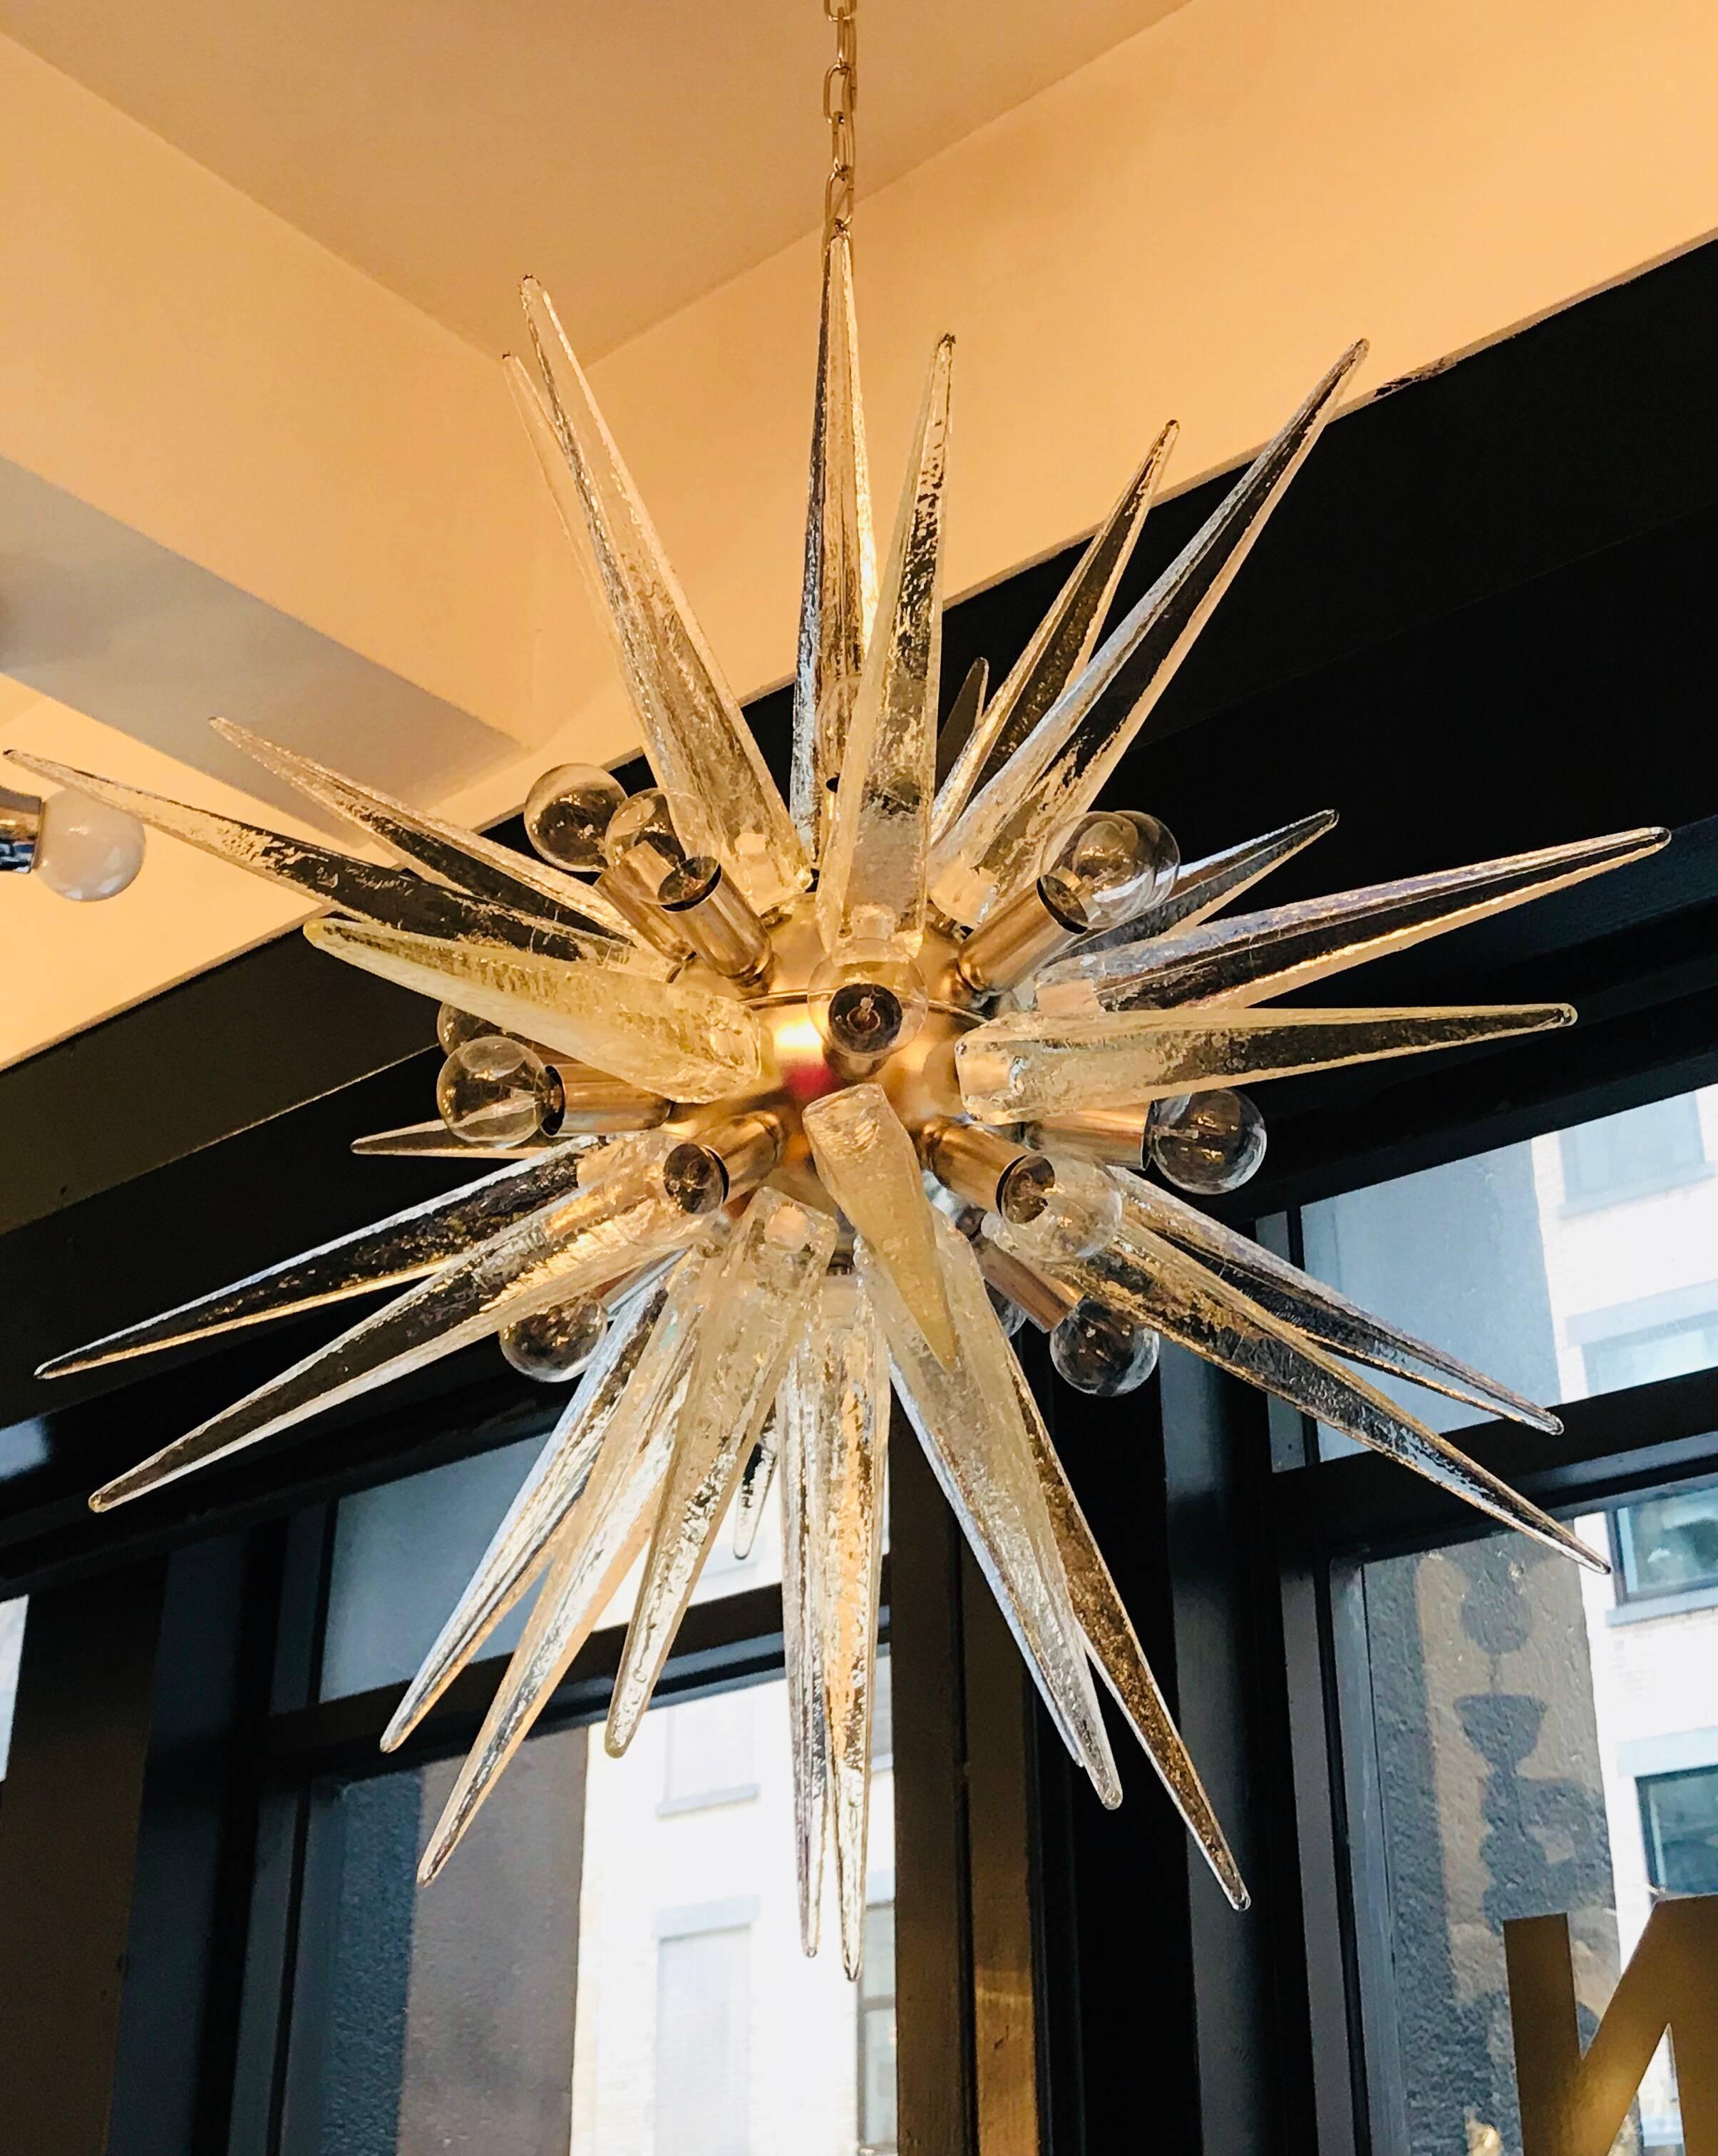 A luxurious, rare, 1970s snowflake Sputnik light composed of a polished chrome sphere body and thick solid Murano glass obelisk shaped elements. The textured glass resembled ice. Twenty-light sources. Newly rewired. The glass body at its widest is